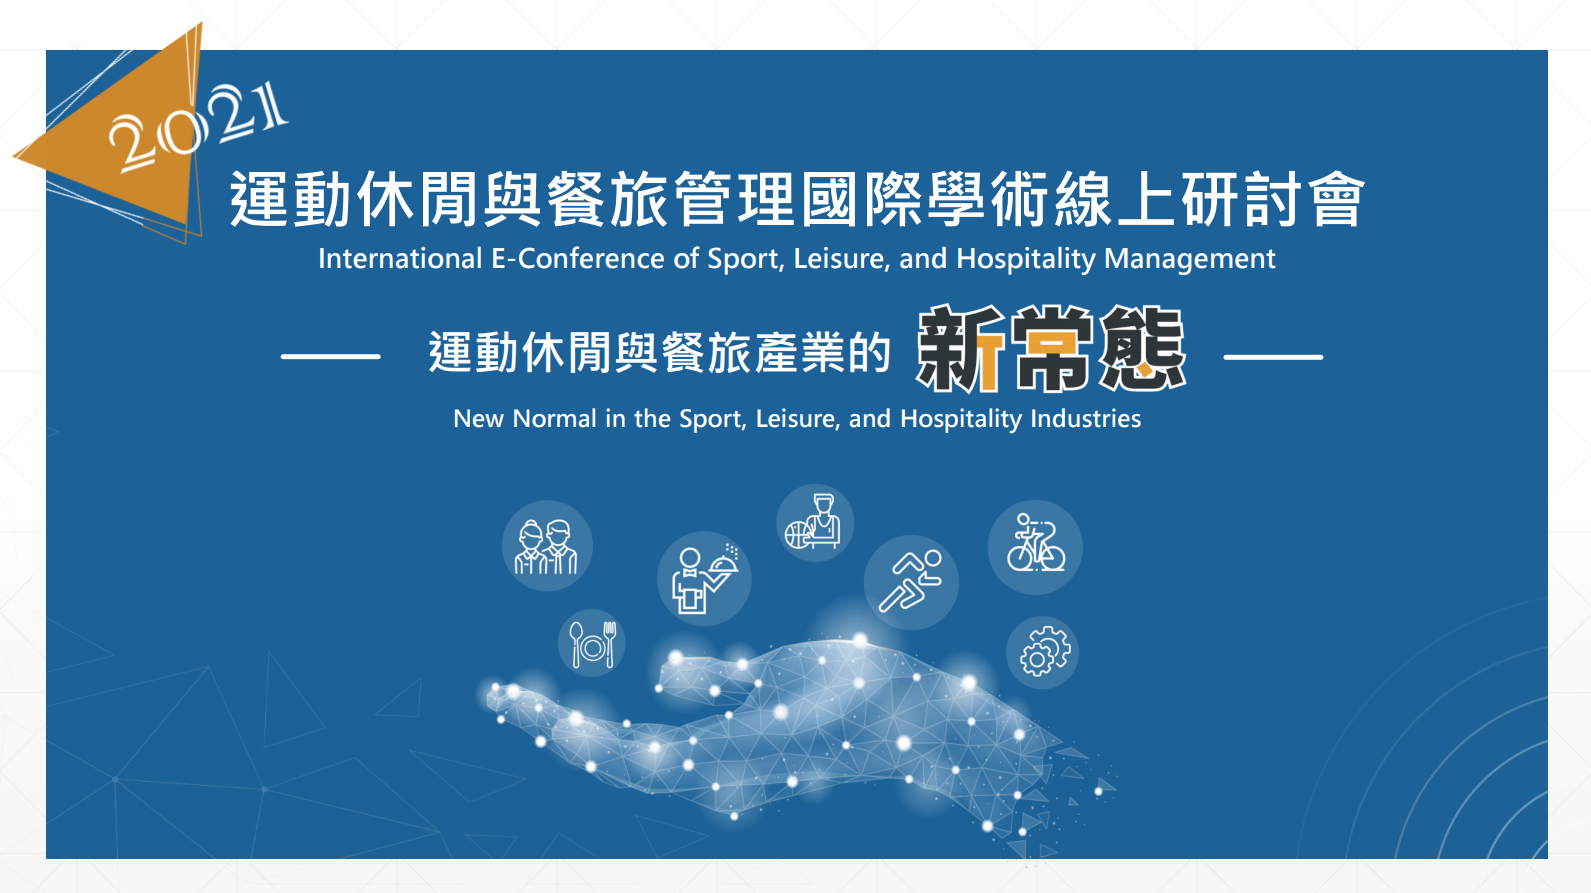 2021 International Conference of Sport, Leisure, and Hospitality Management